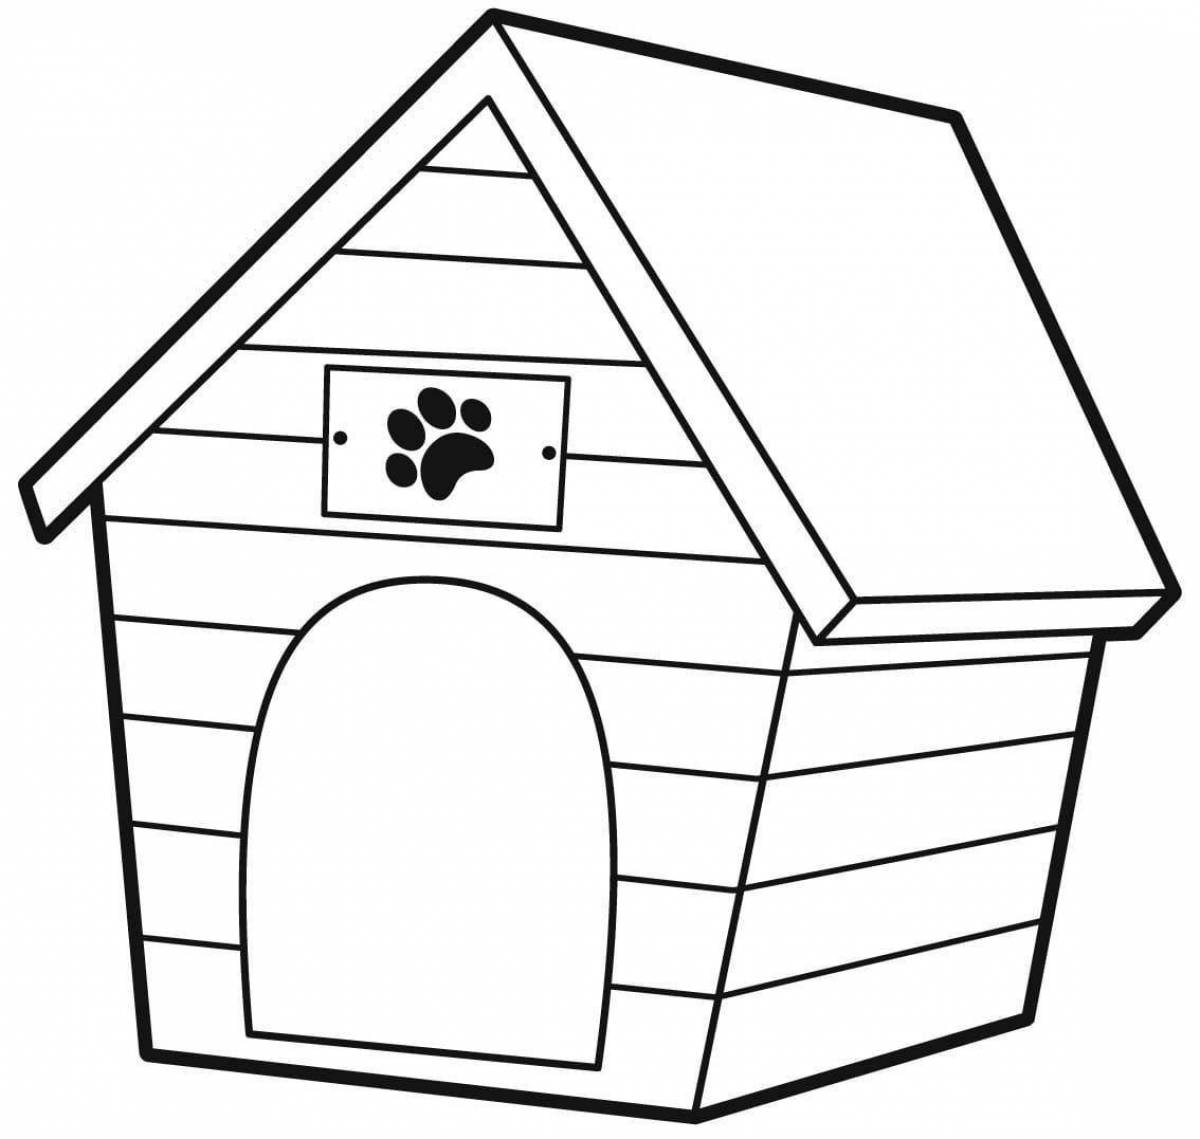 Adorable dog house coloring page